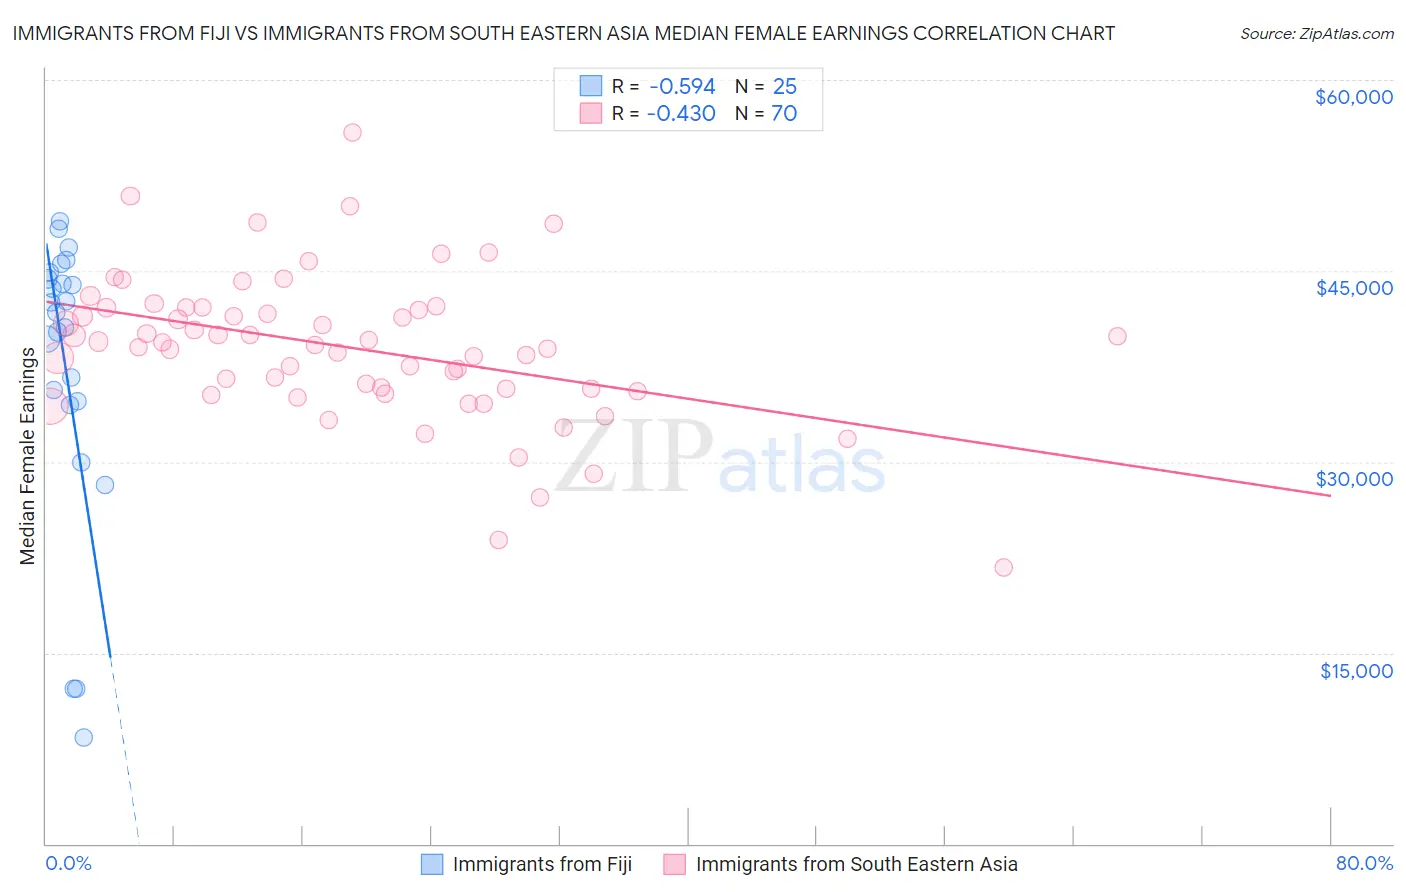 Immigrants from Fiji vs Immigrants from South Eastern Asia Median Female Earnings